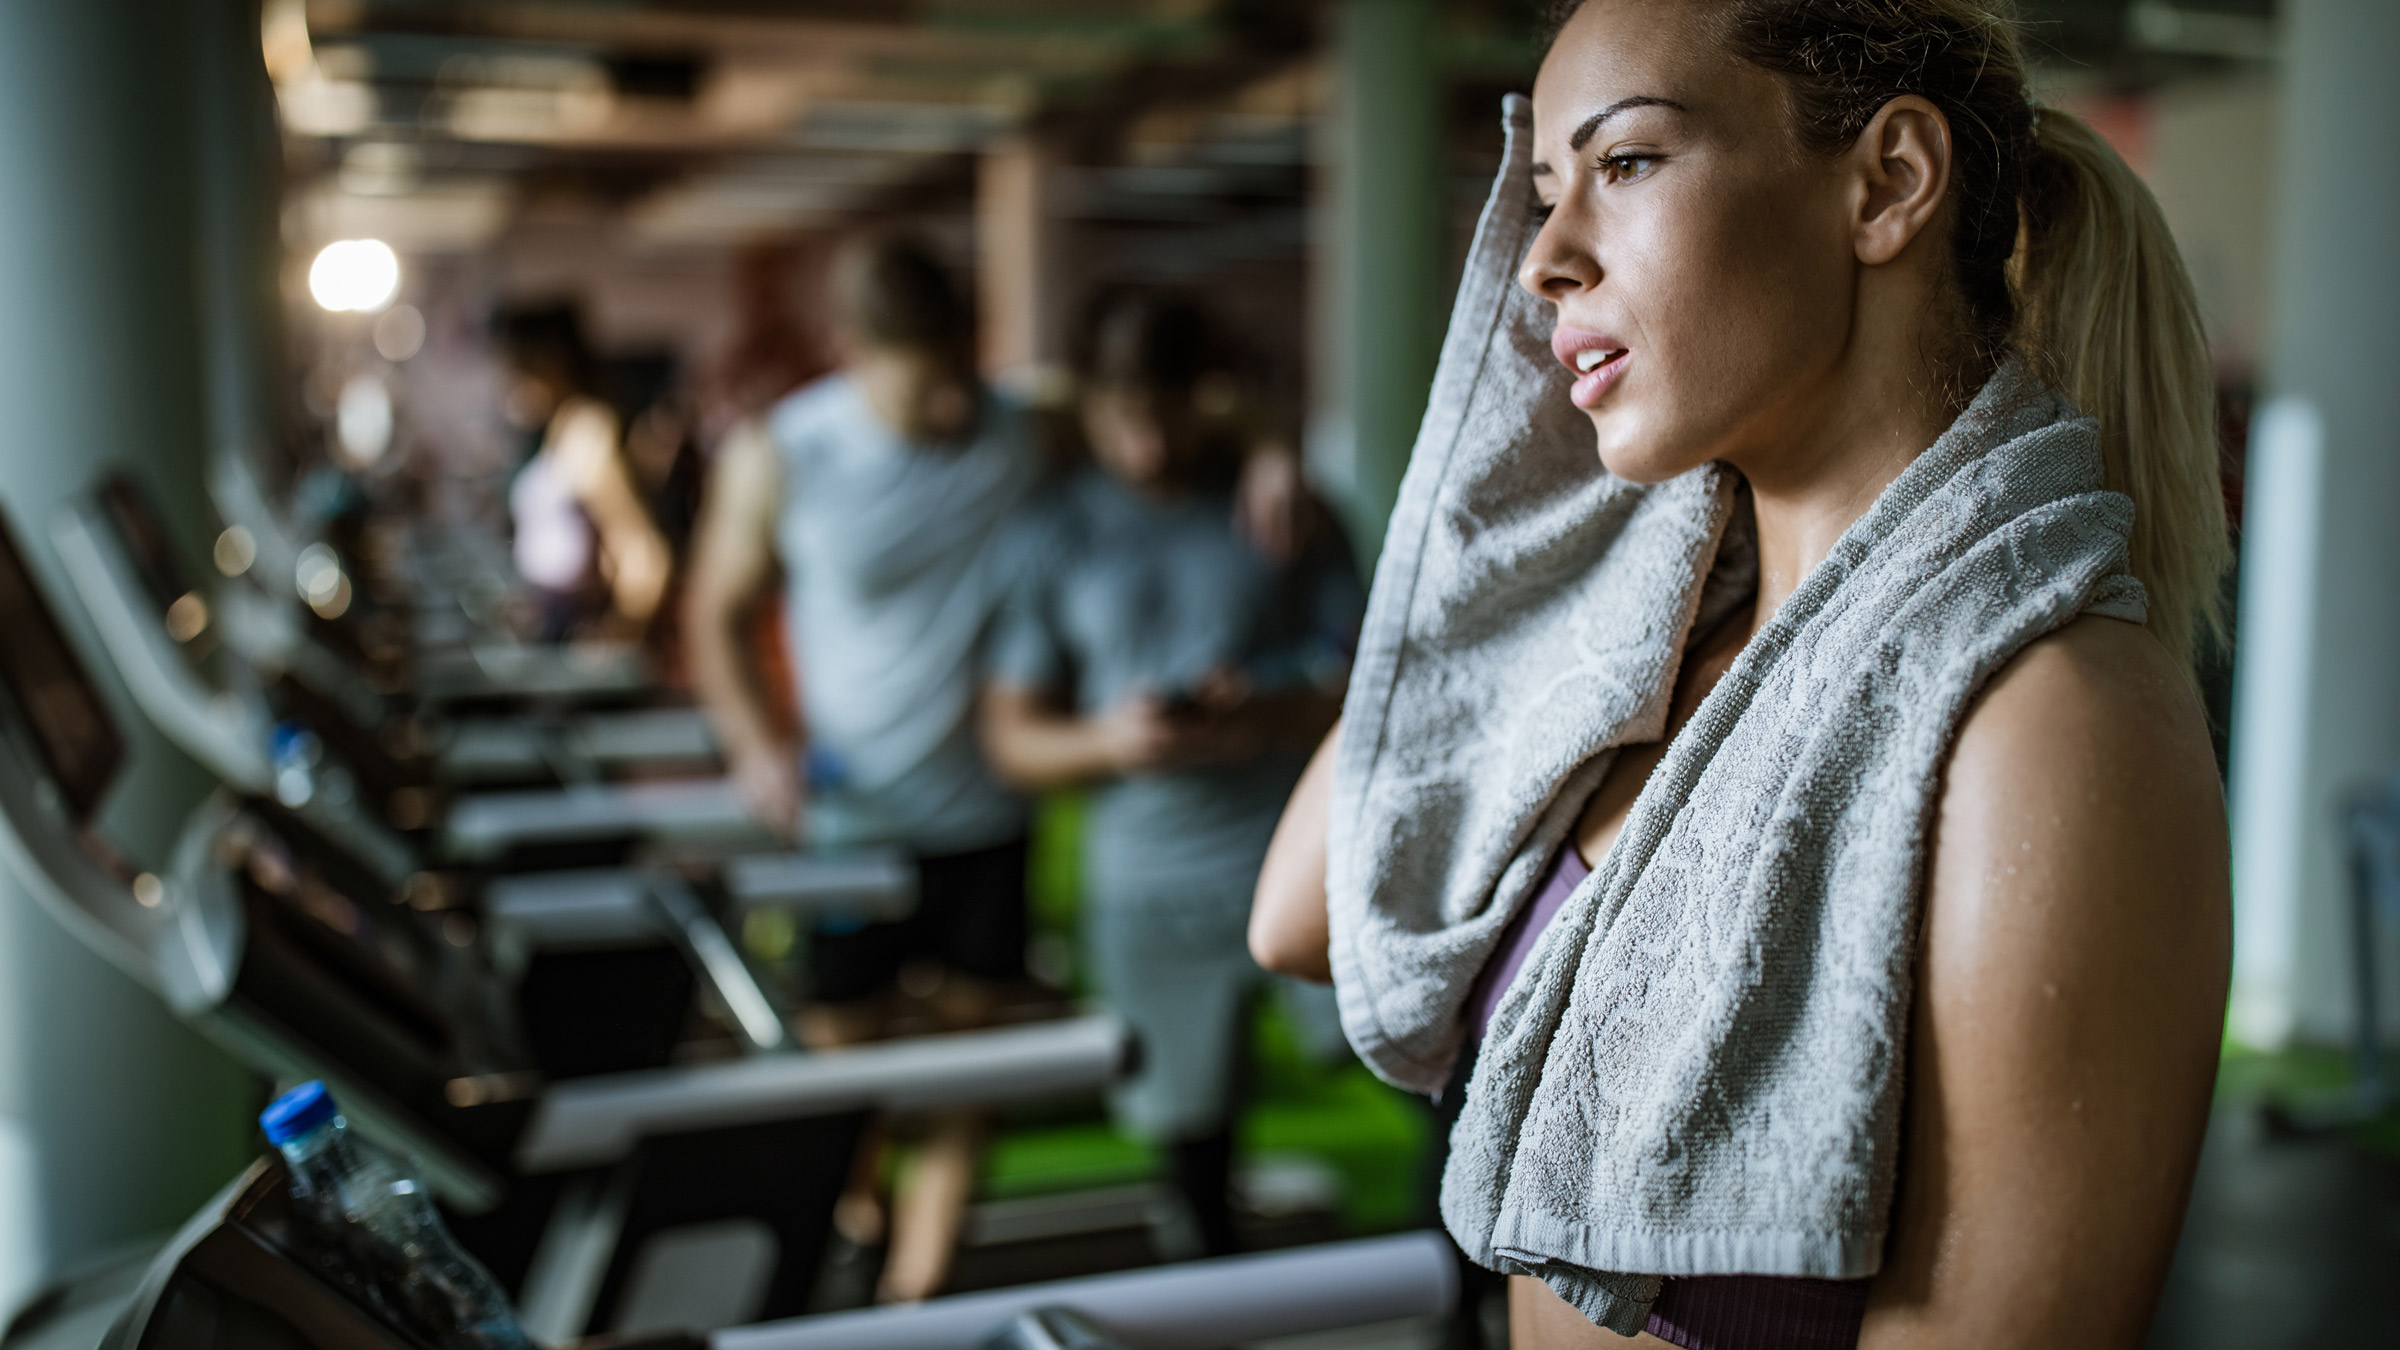 Gym Anxiety? Read these 7 Tips to get over it!